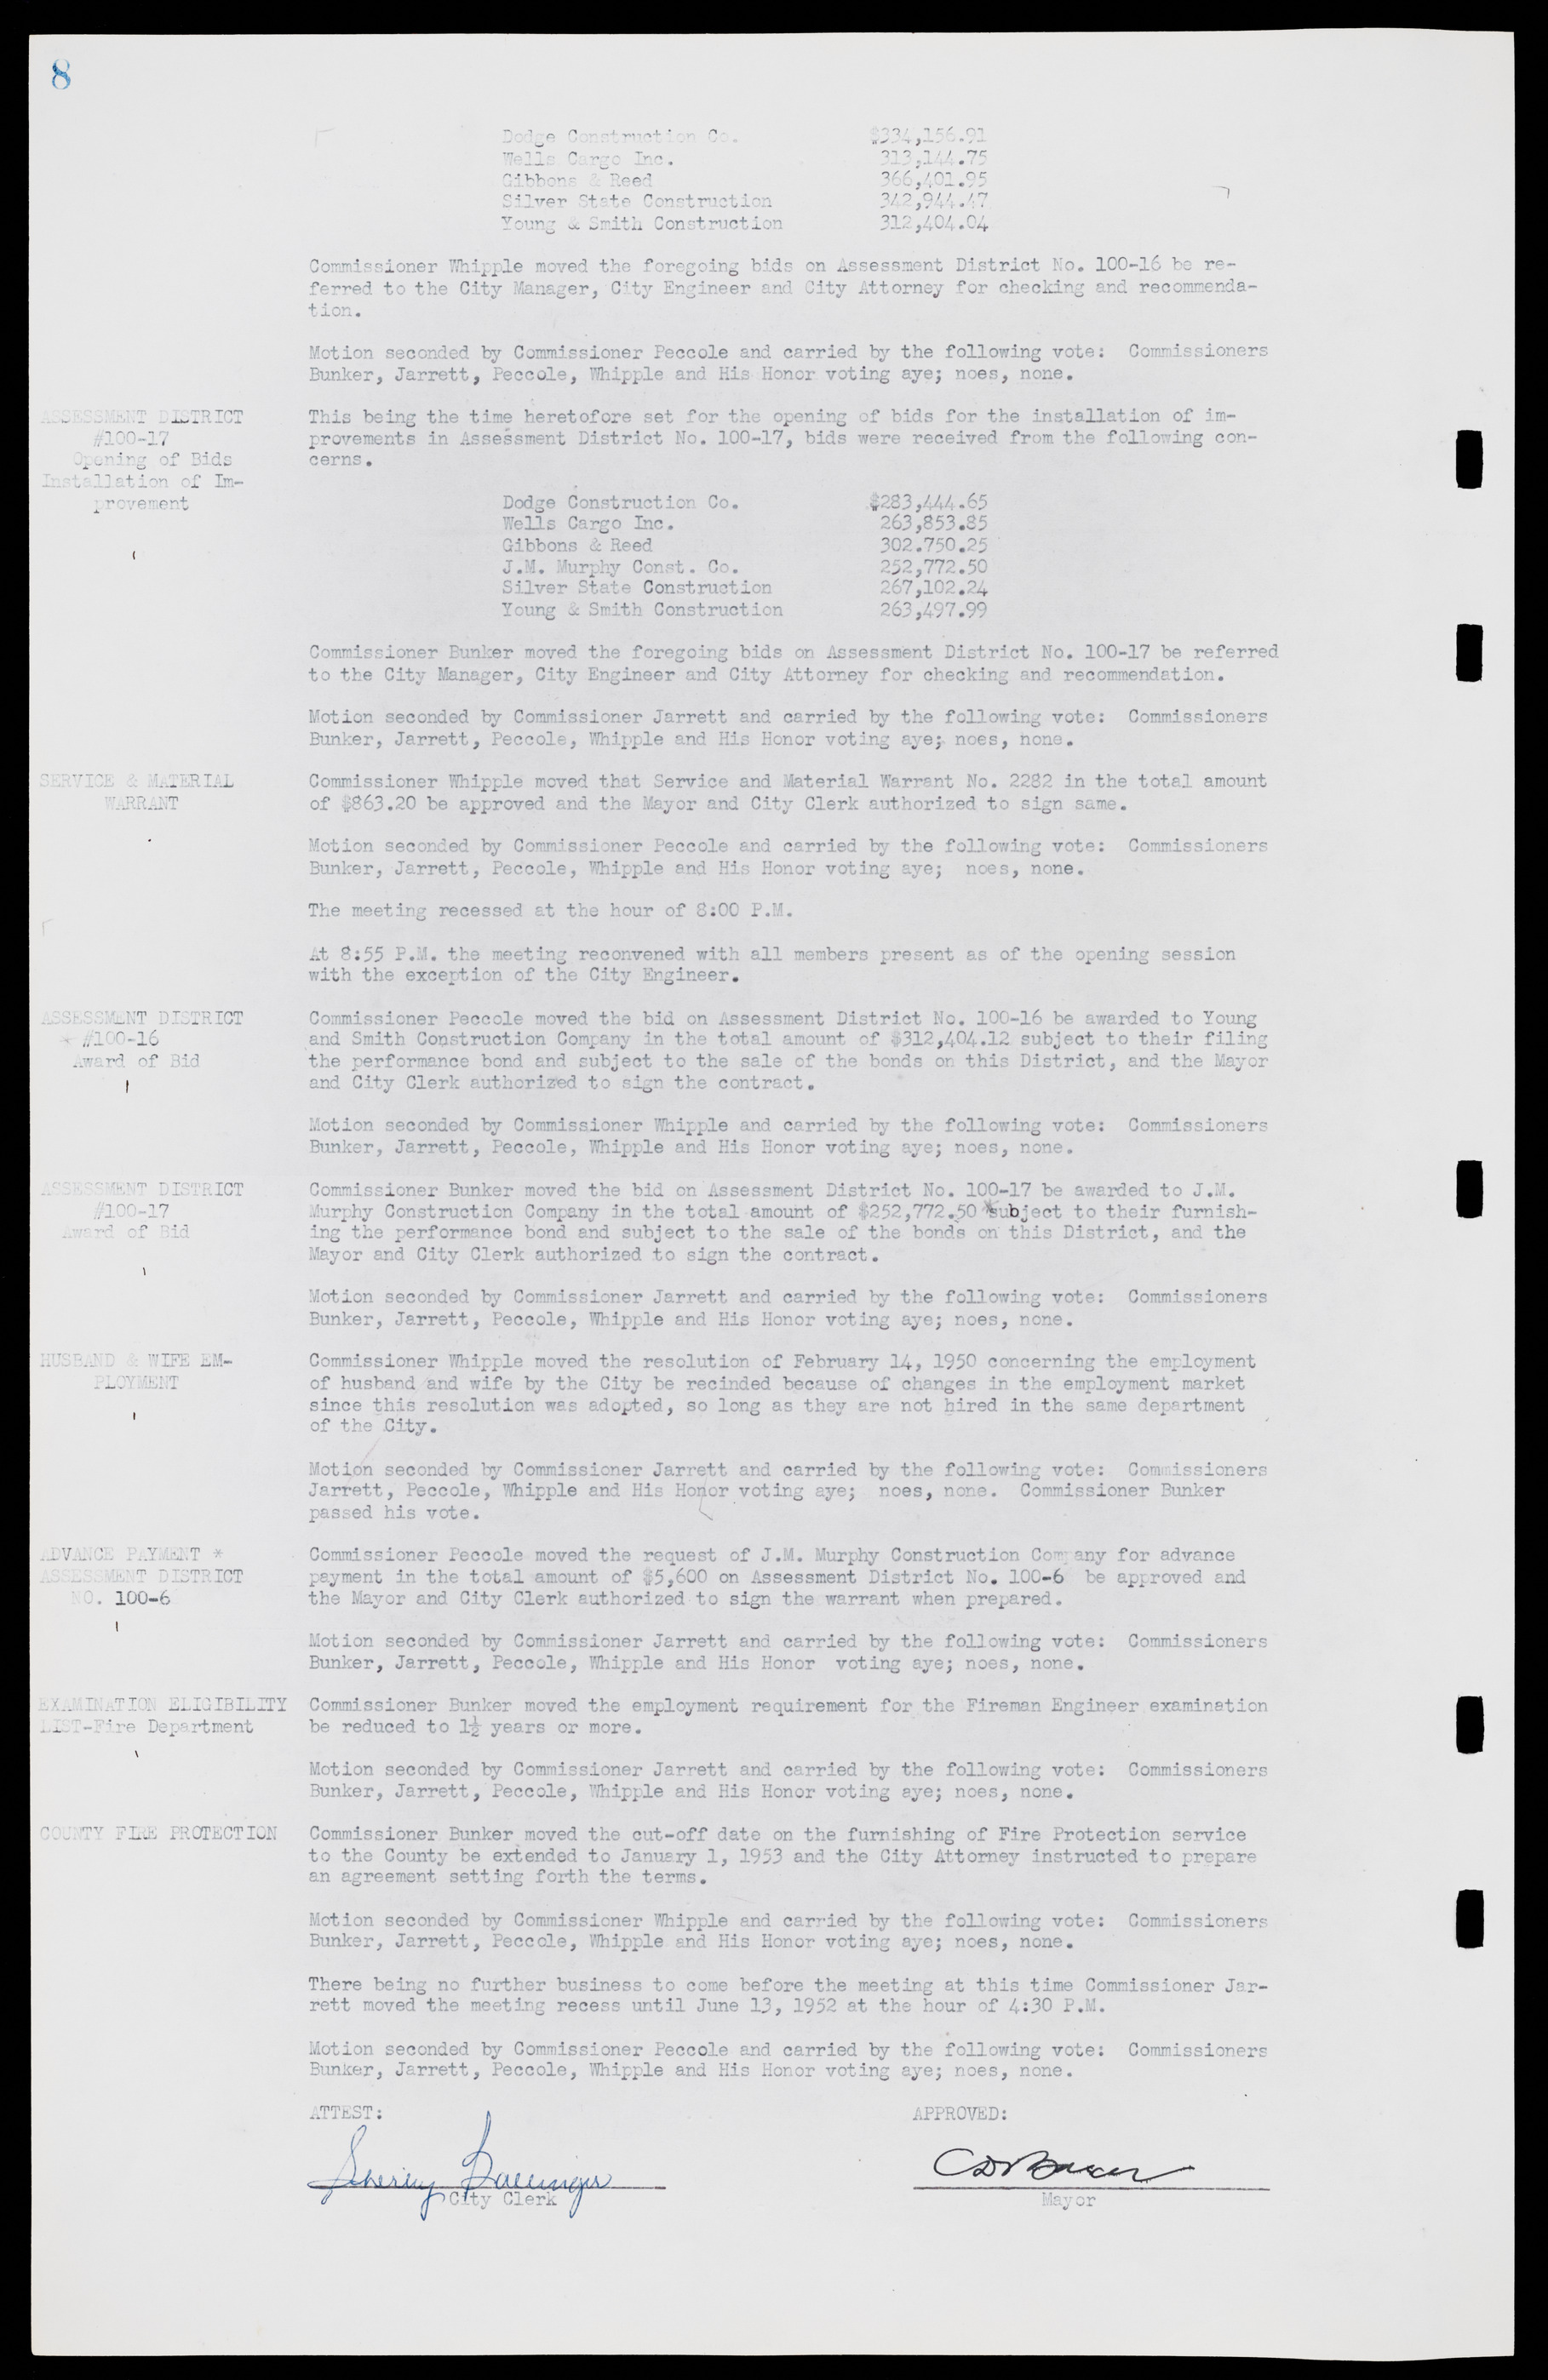 Las Vegas City Commission Minutes, May 26, 1952 to February 17, 1954, lvc000008-12